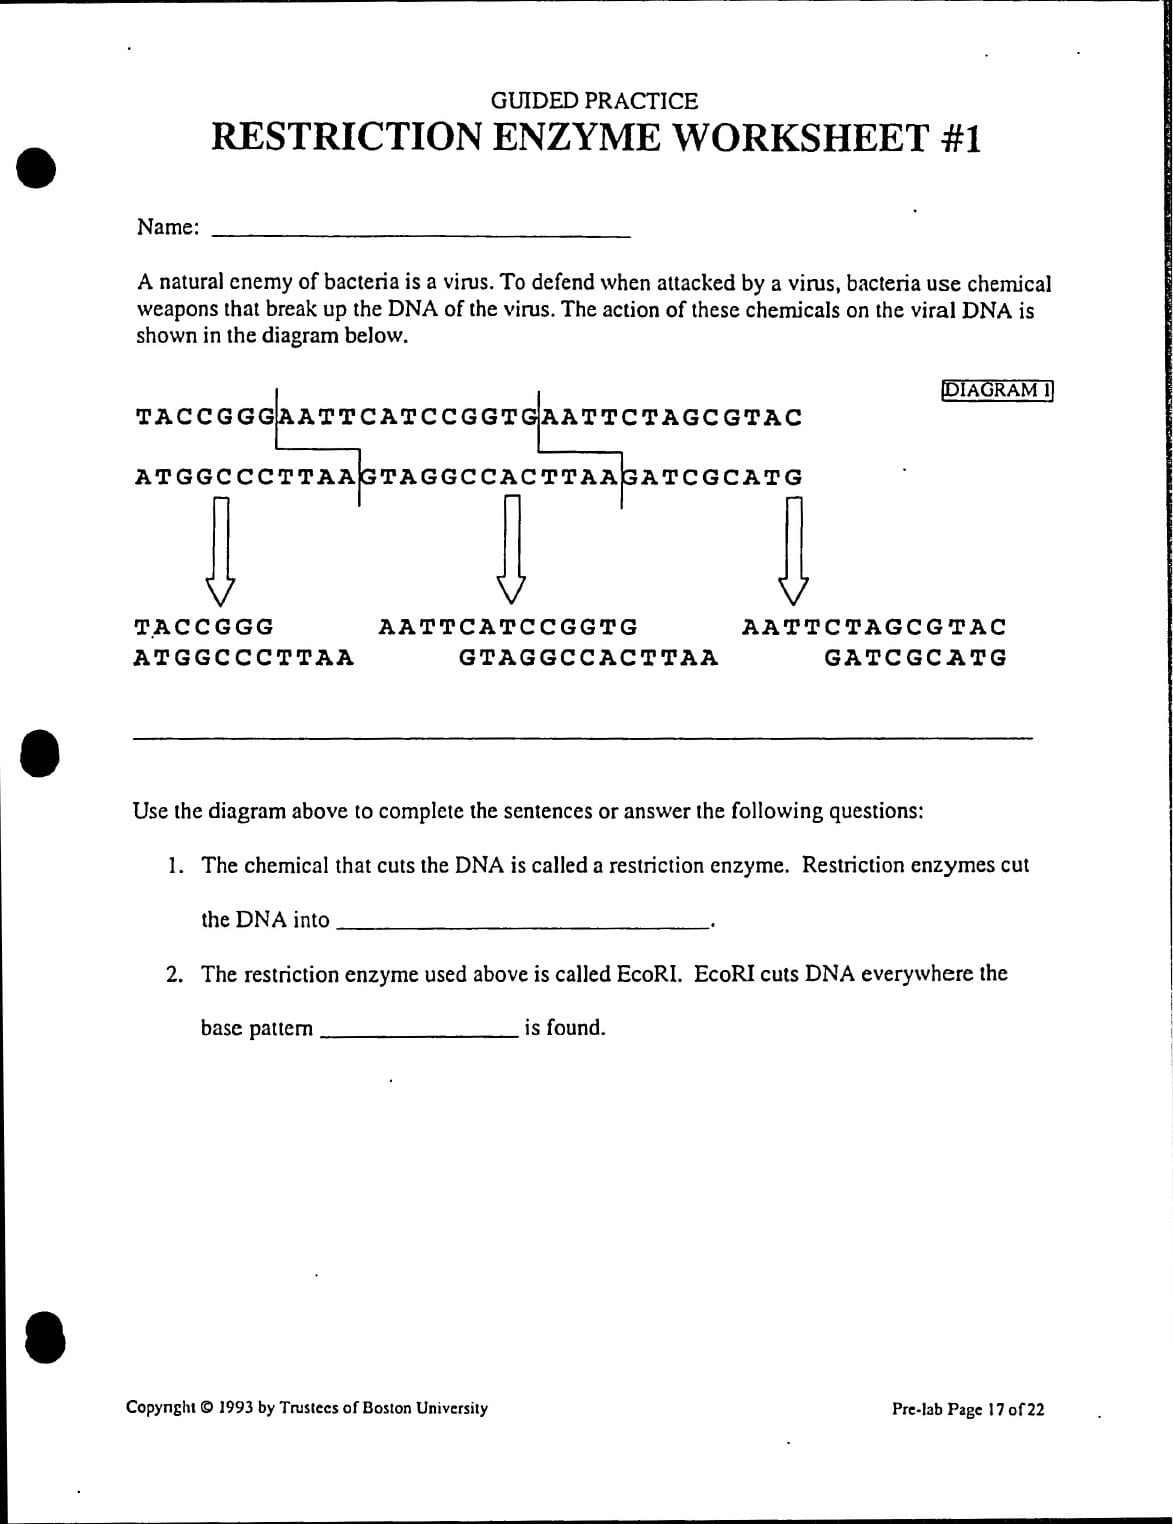 restriction-enzyme-worksheet-free-download-goodimg-co